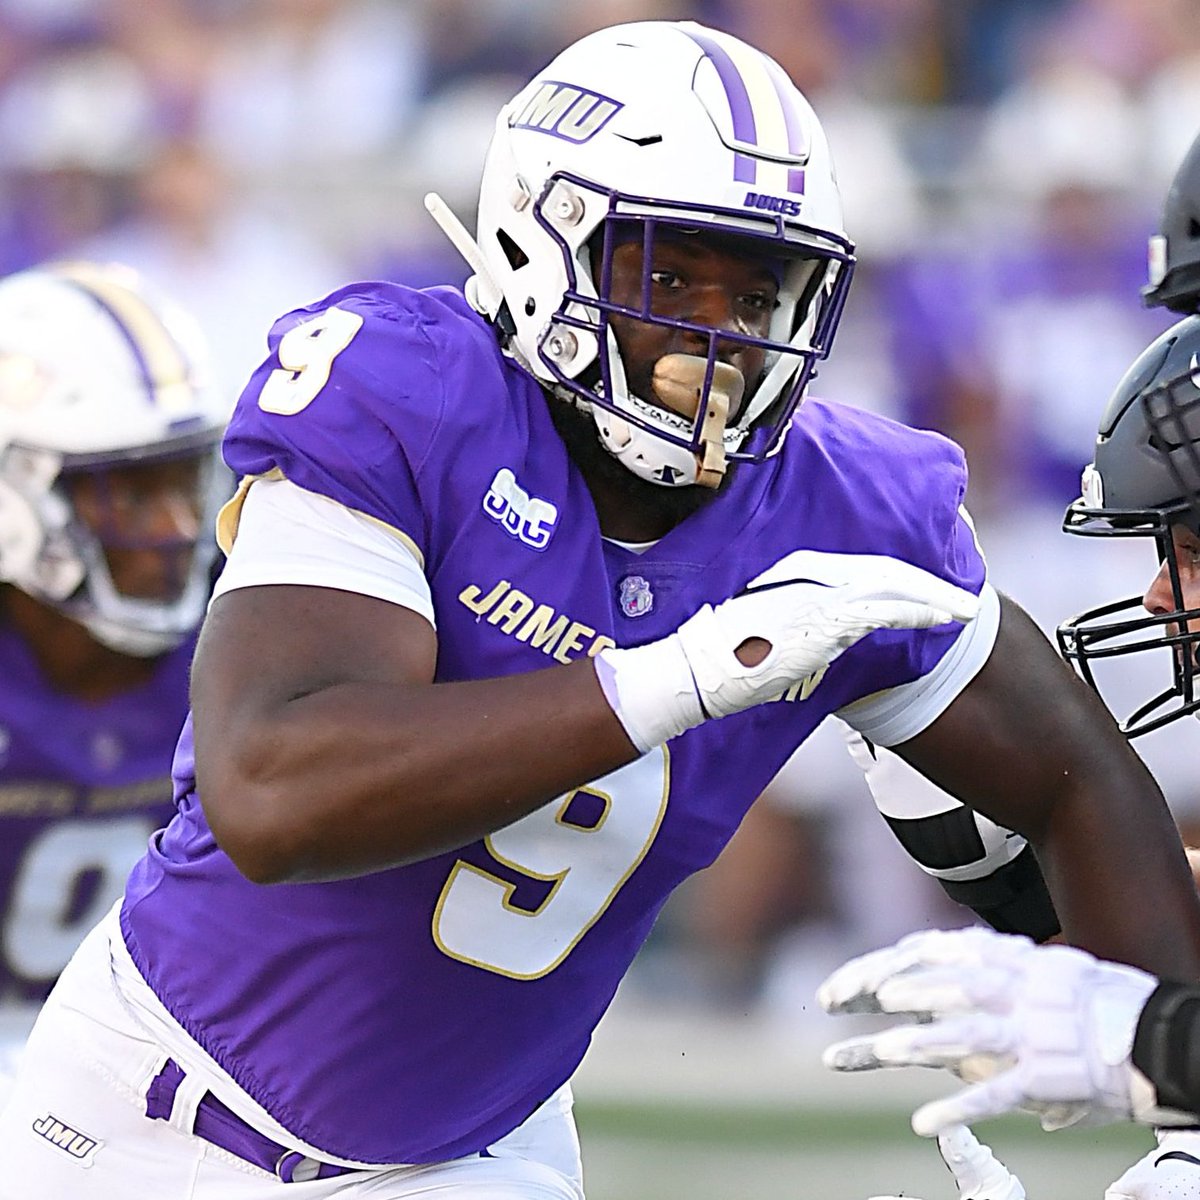 Former James Madison DL Jamree Kromah came on my show today as he hopes to have his named called next week during the NFL Draft. 🔊 on.soundcloud.com/KhSgUfpwdvG8W9… @JMUFootball | @jamreekromah